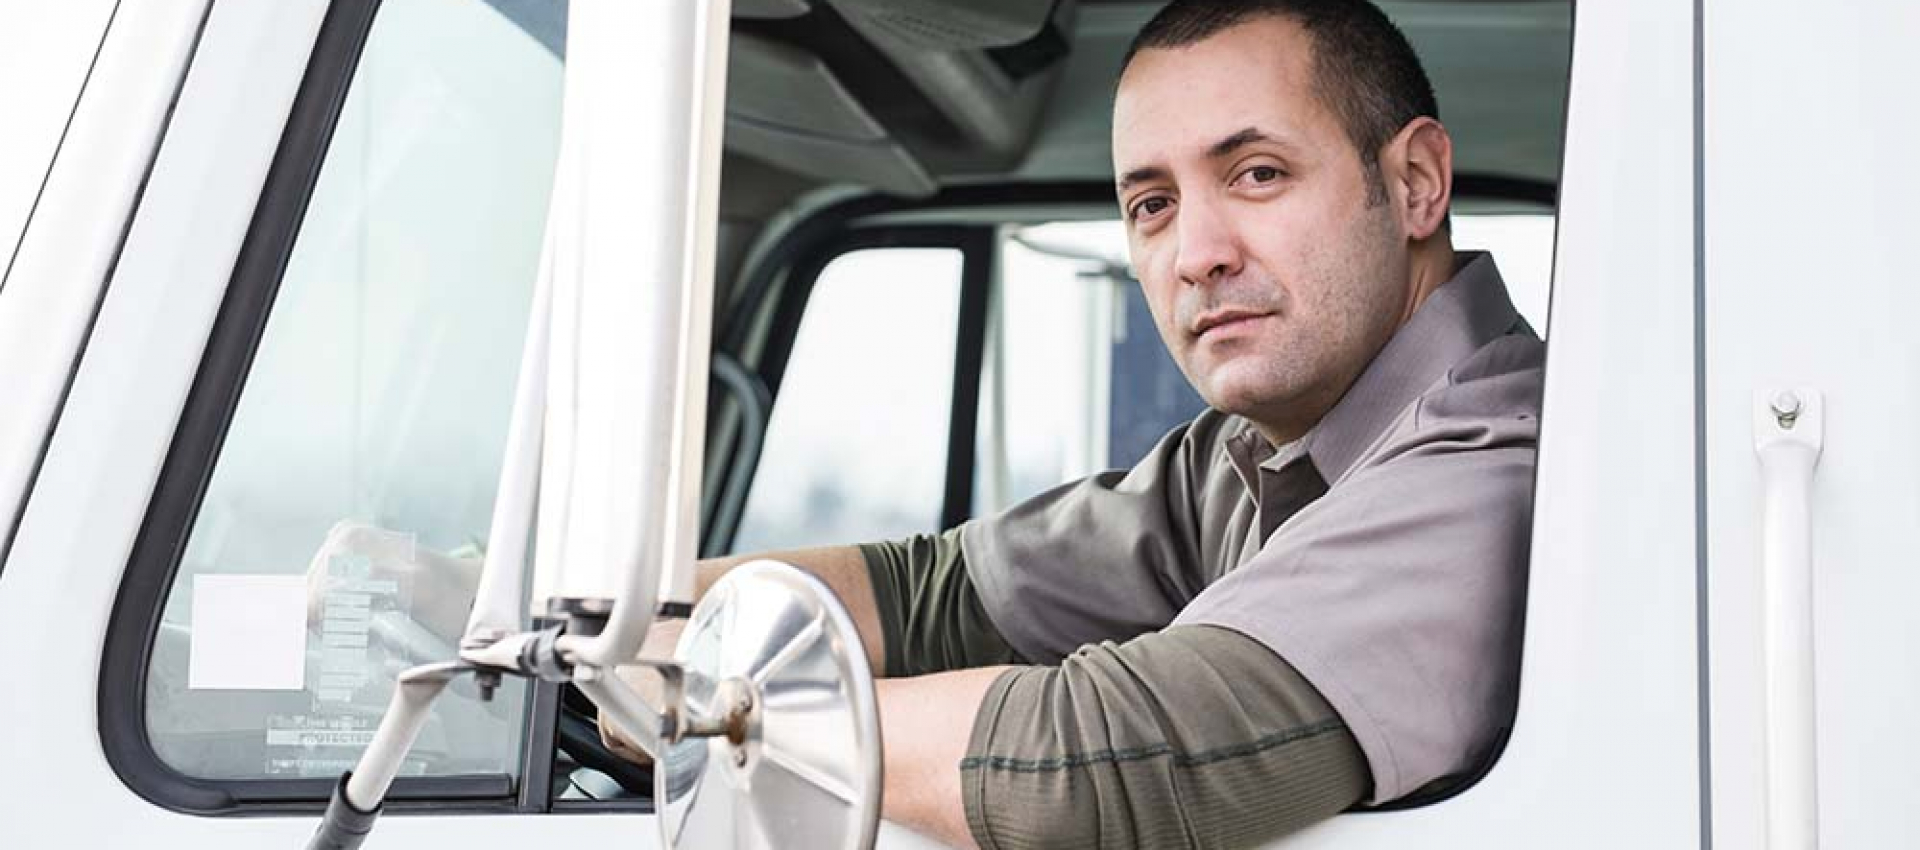 Truck Driving – What Basic Things Should a Driver Know? 